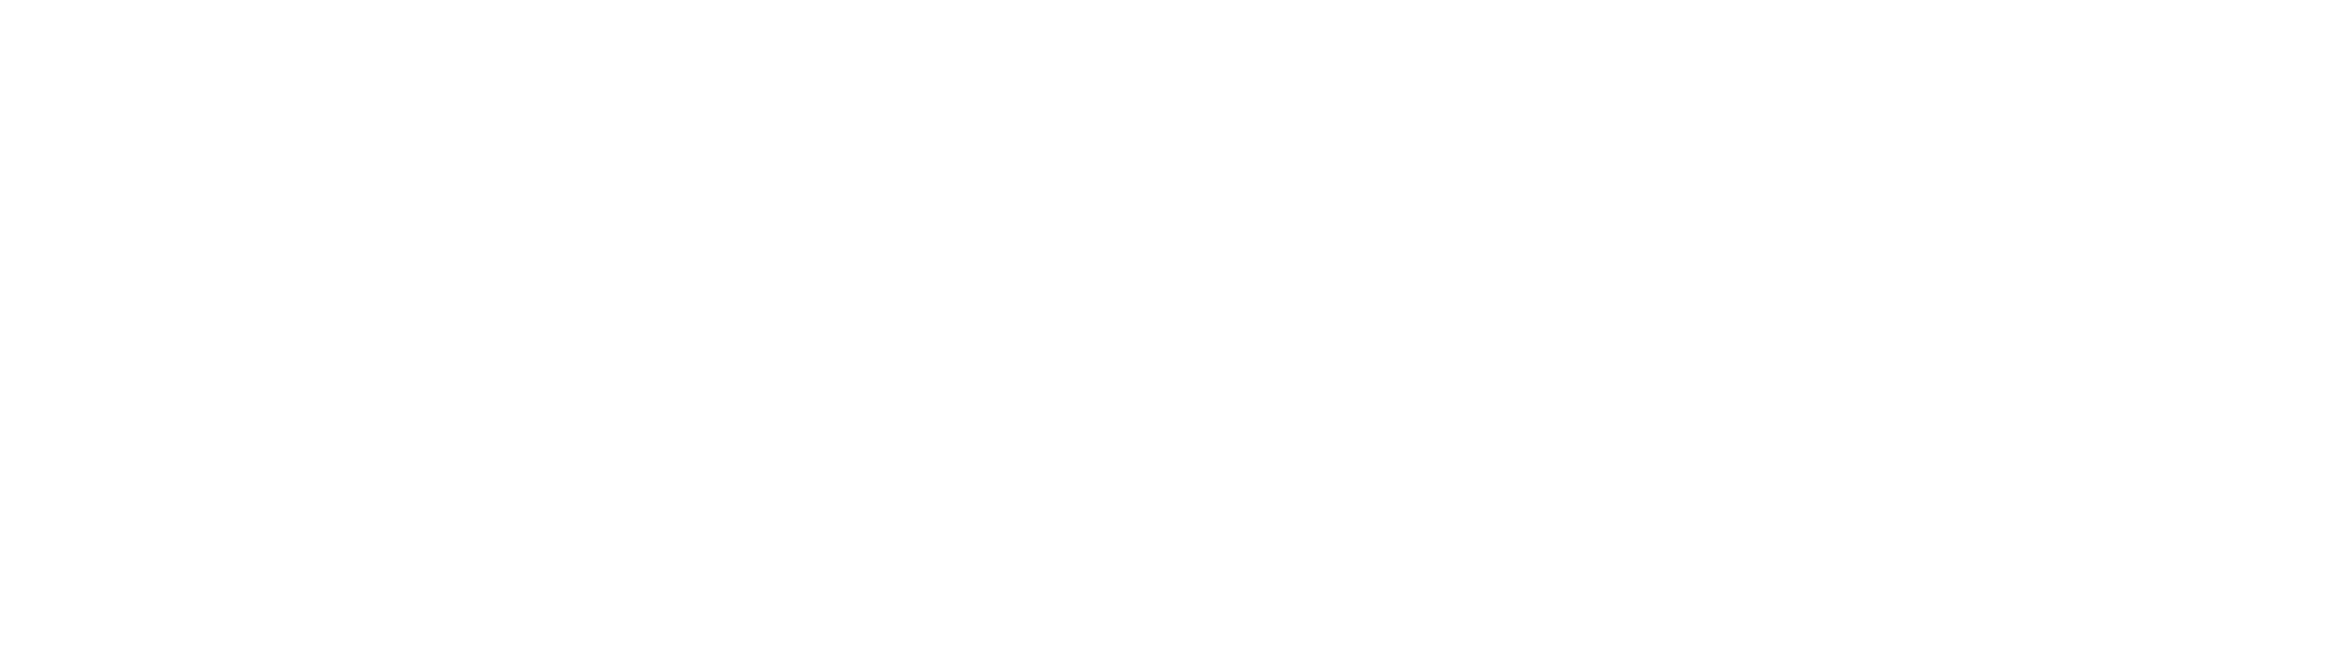 Property Force 